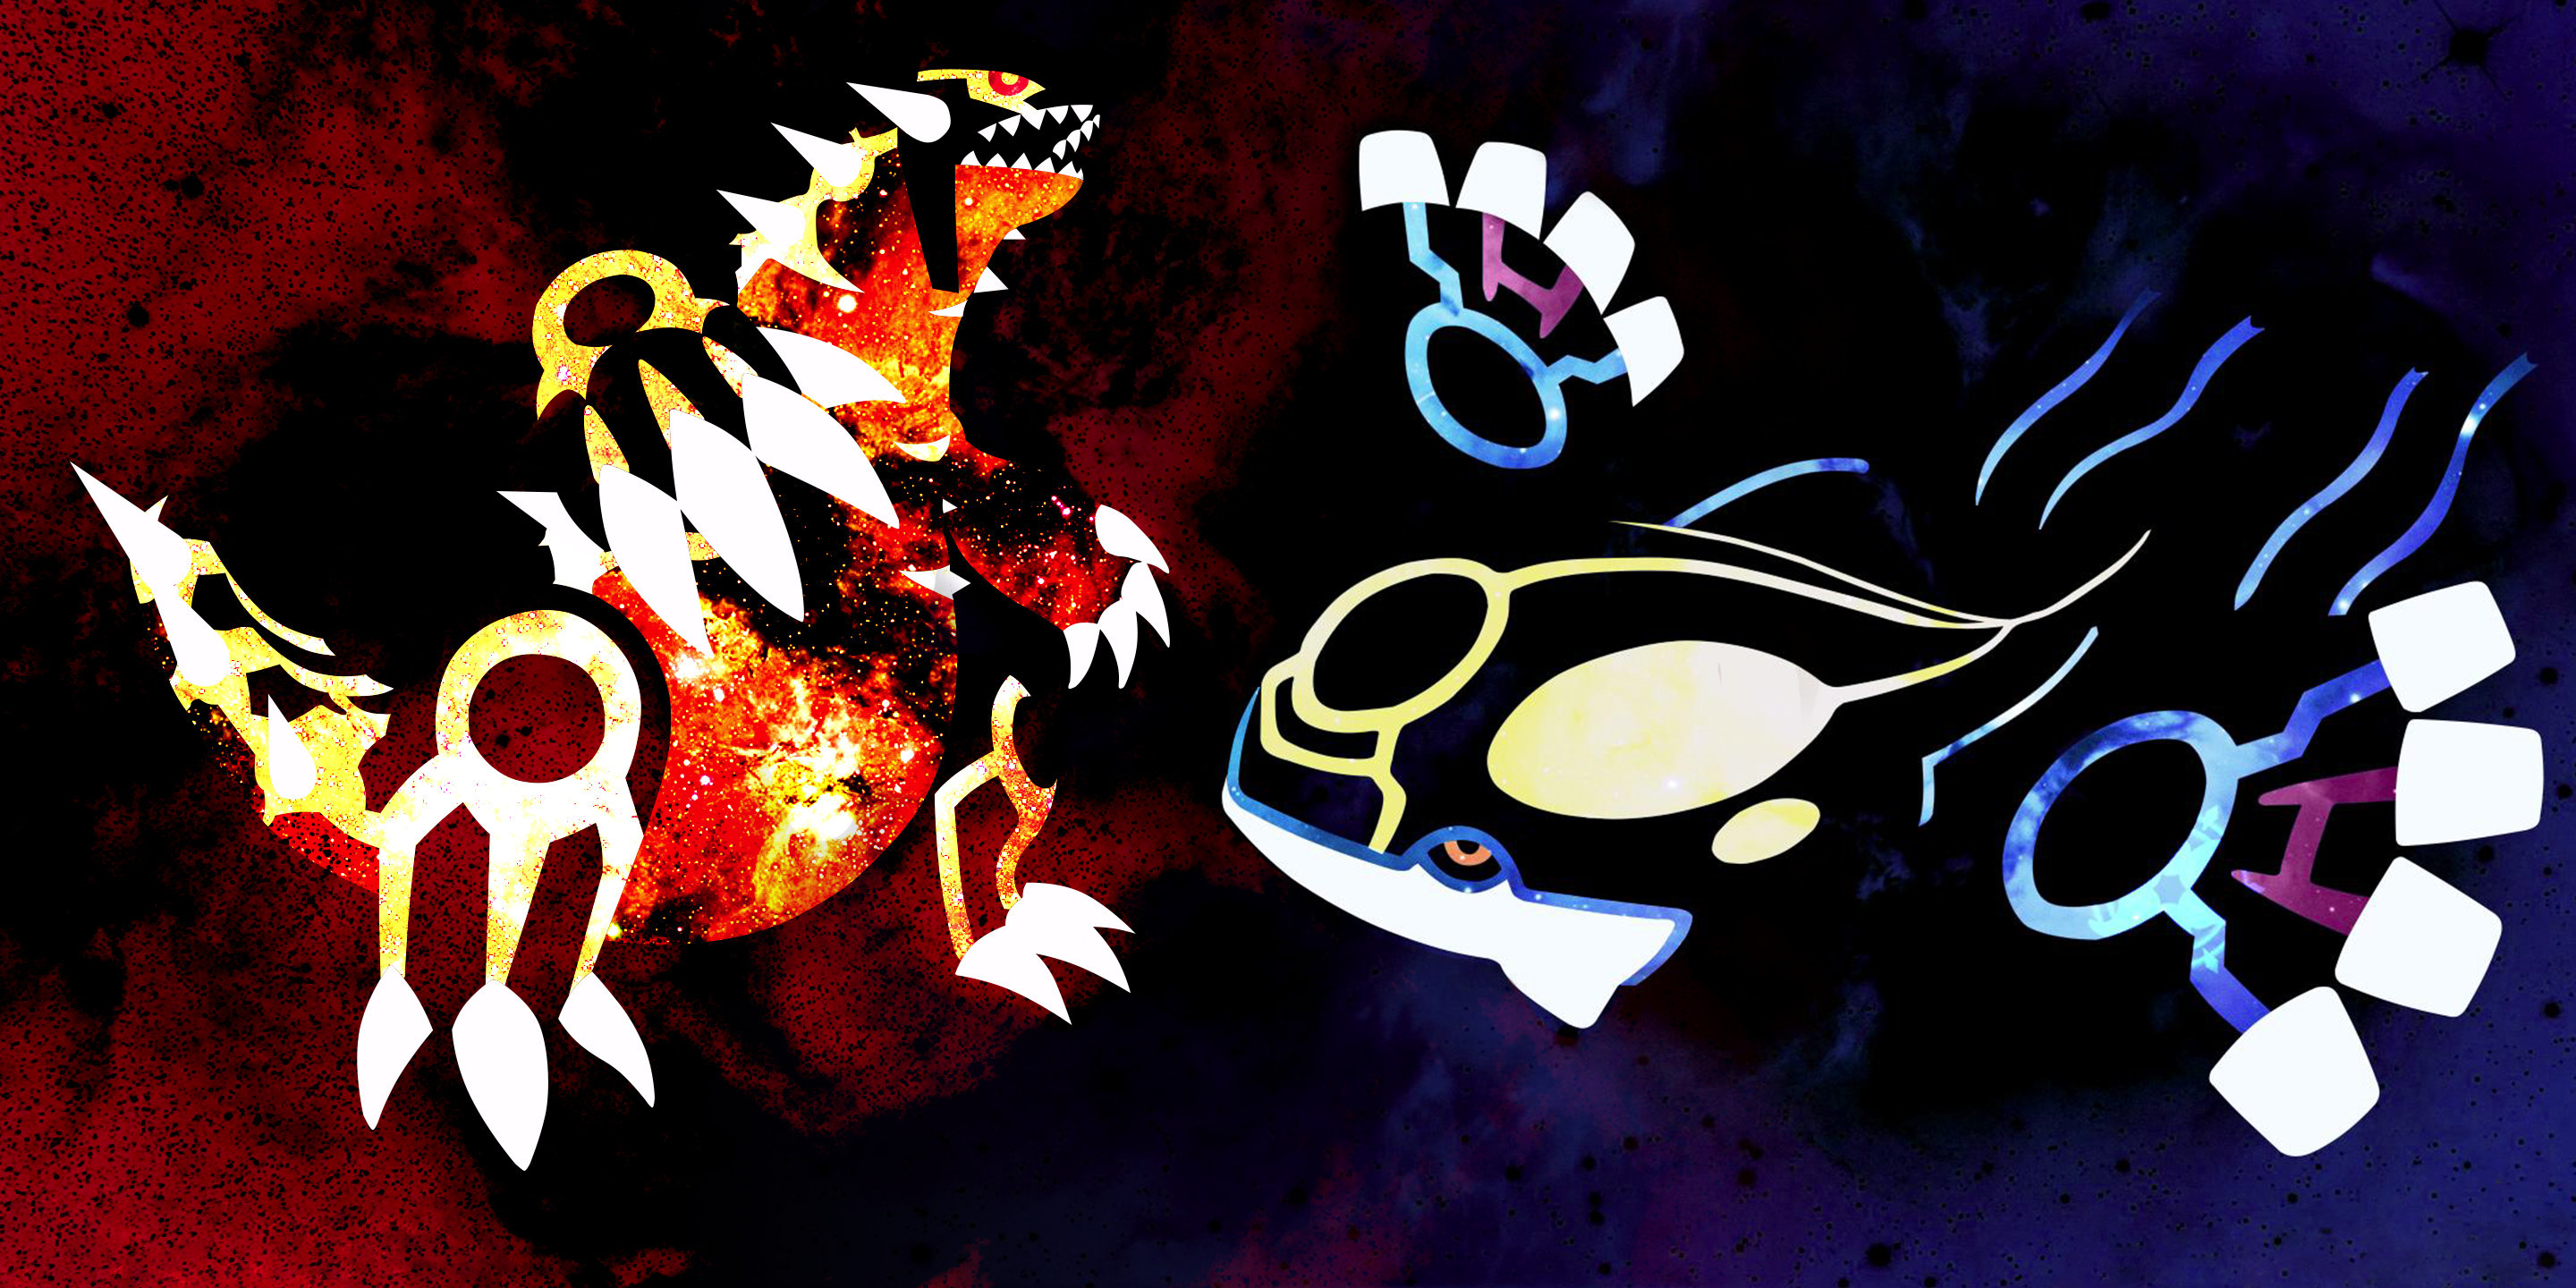 2880x1440 My collection of Pokemon wallpapers gathered over the past year .